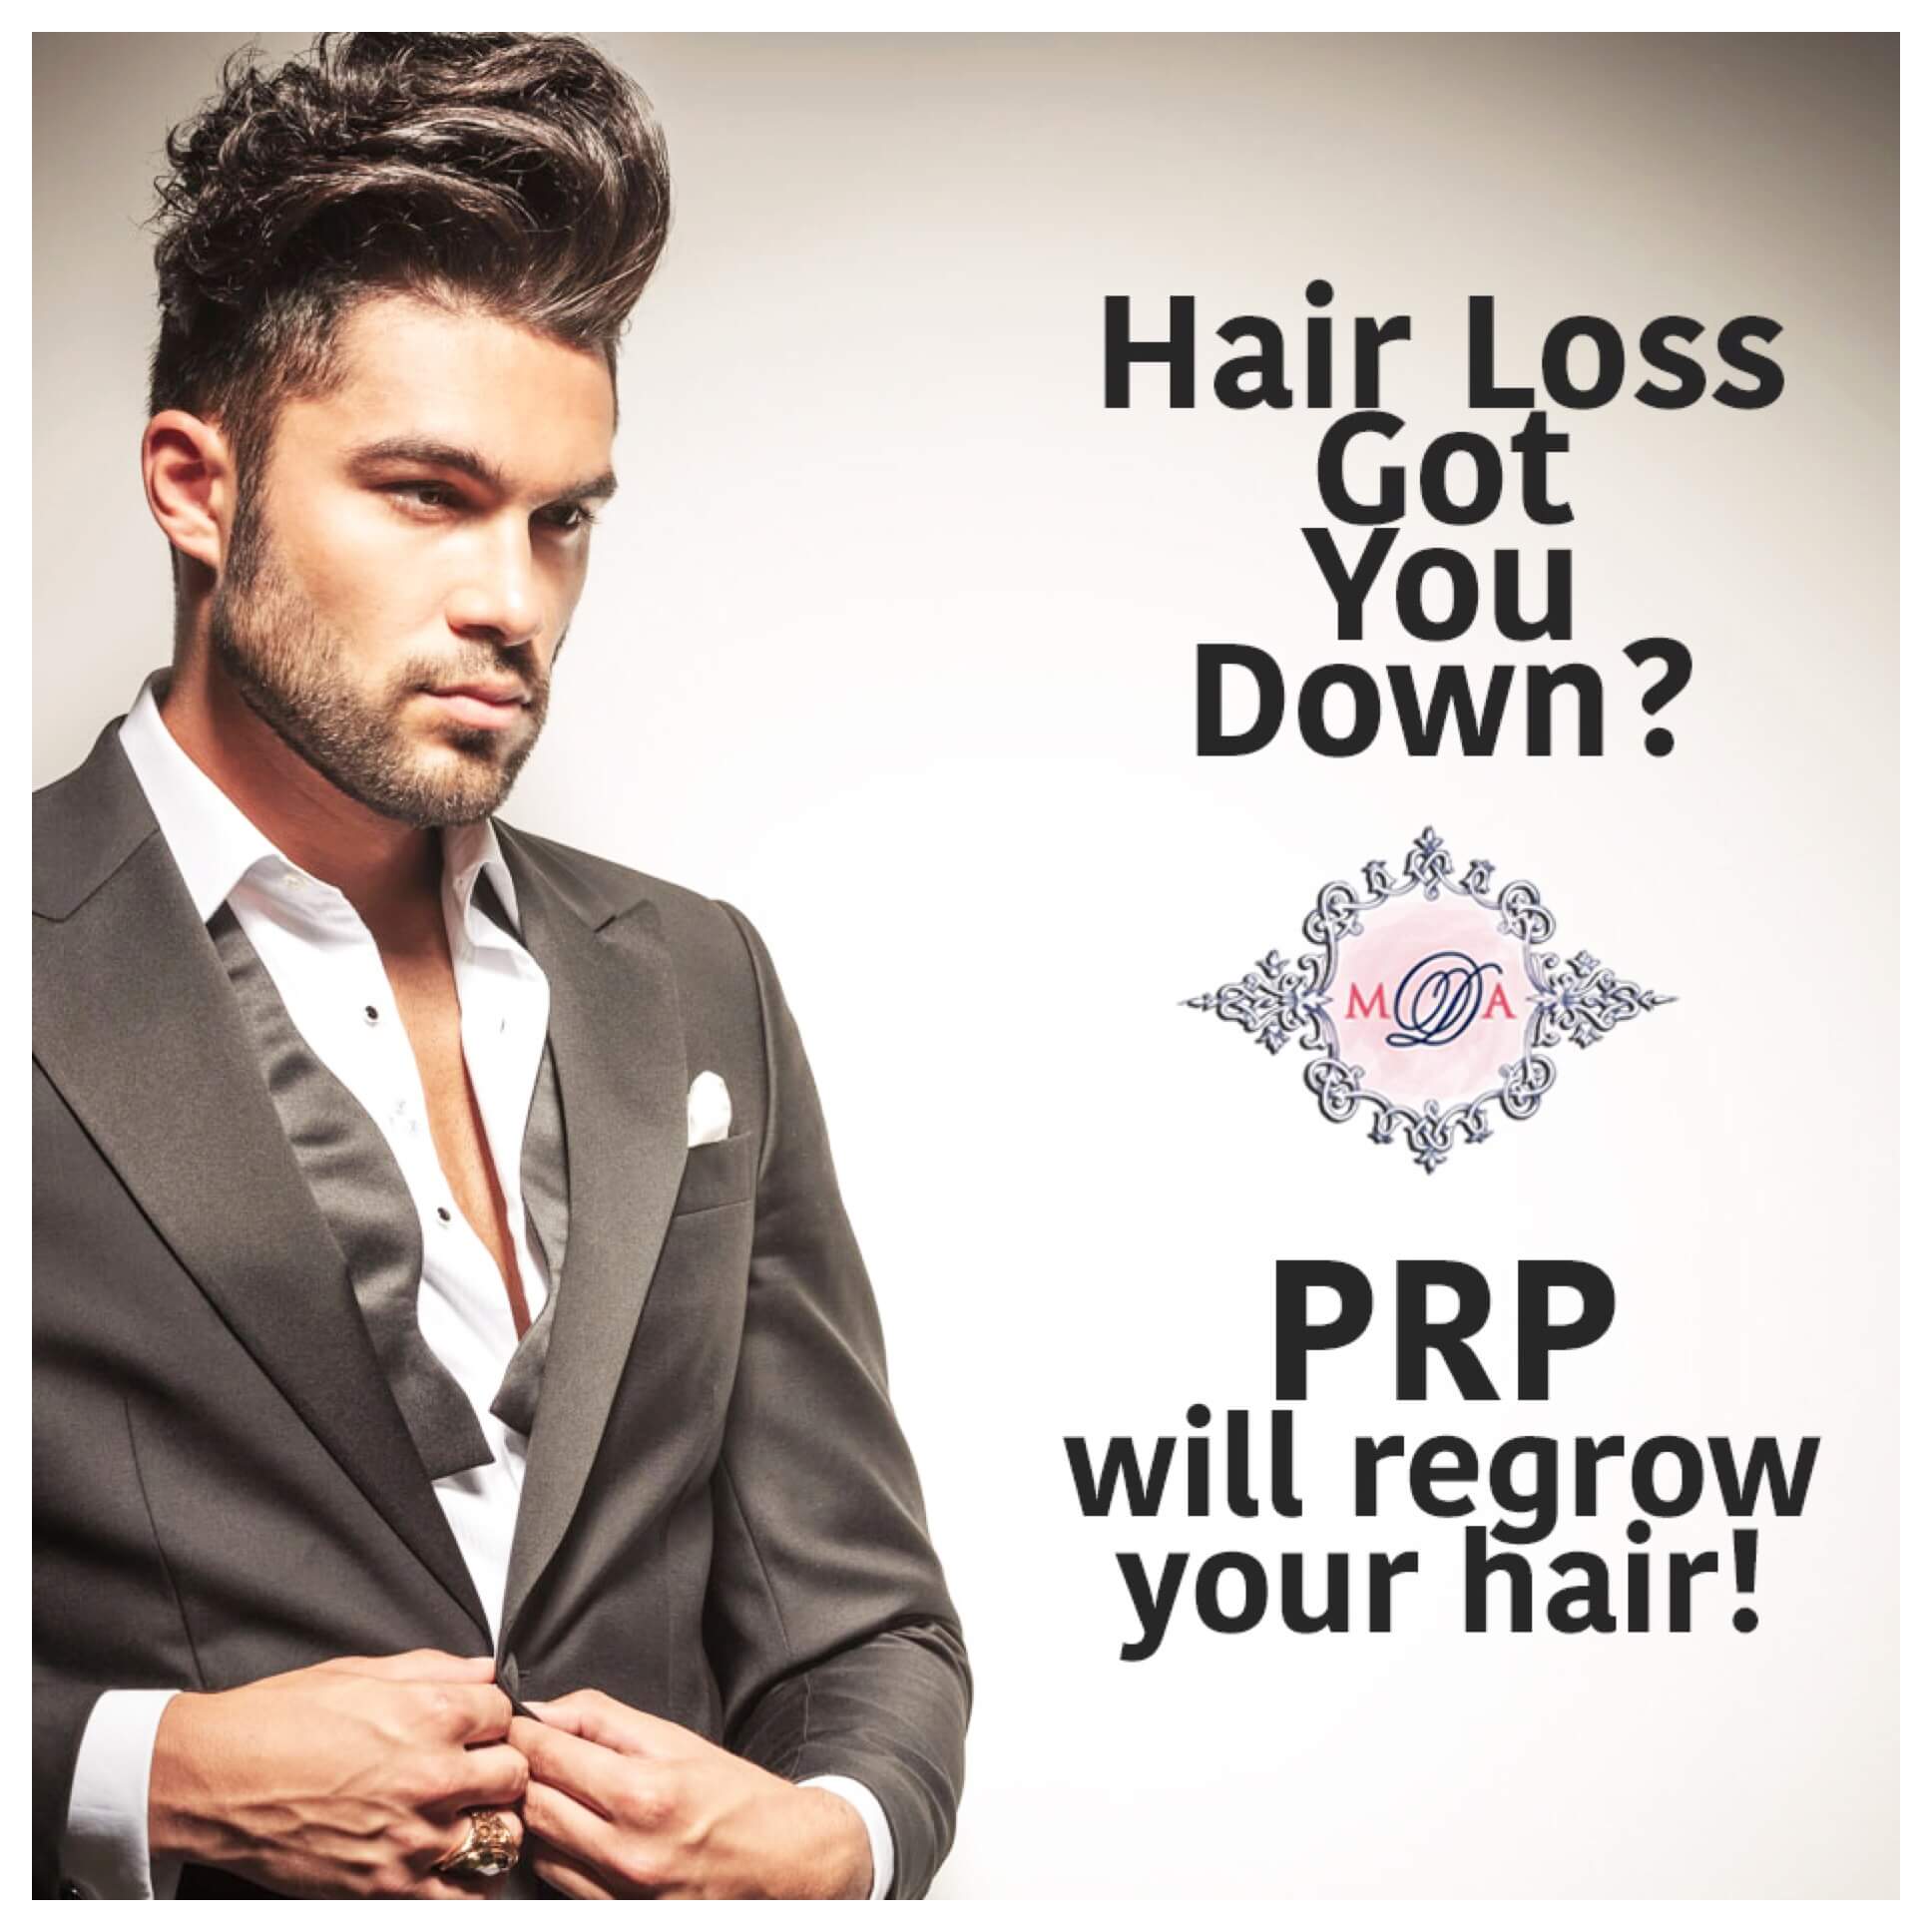 PRP will regrow your hair